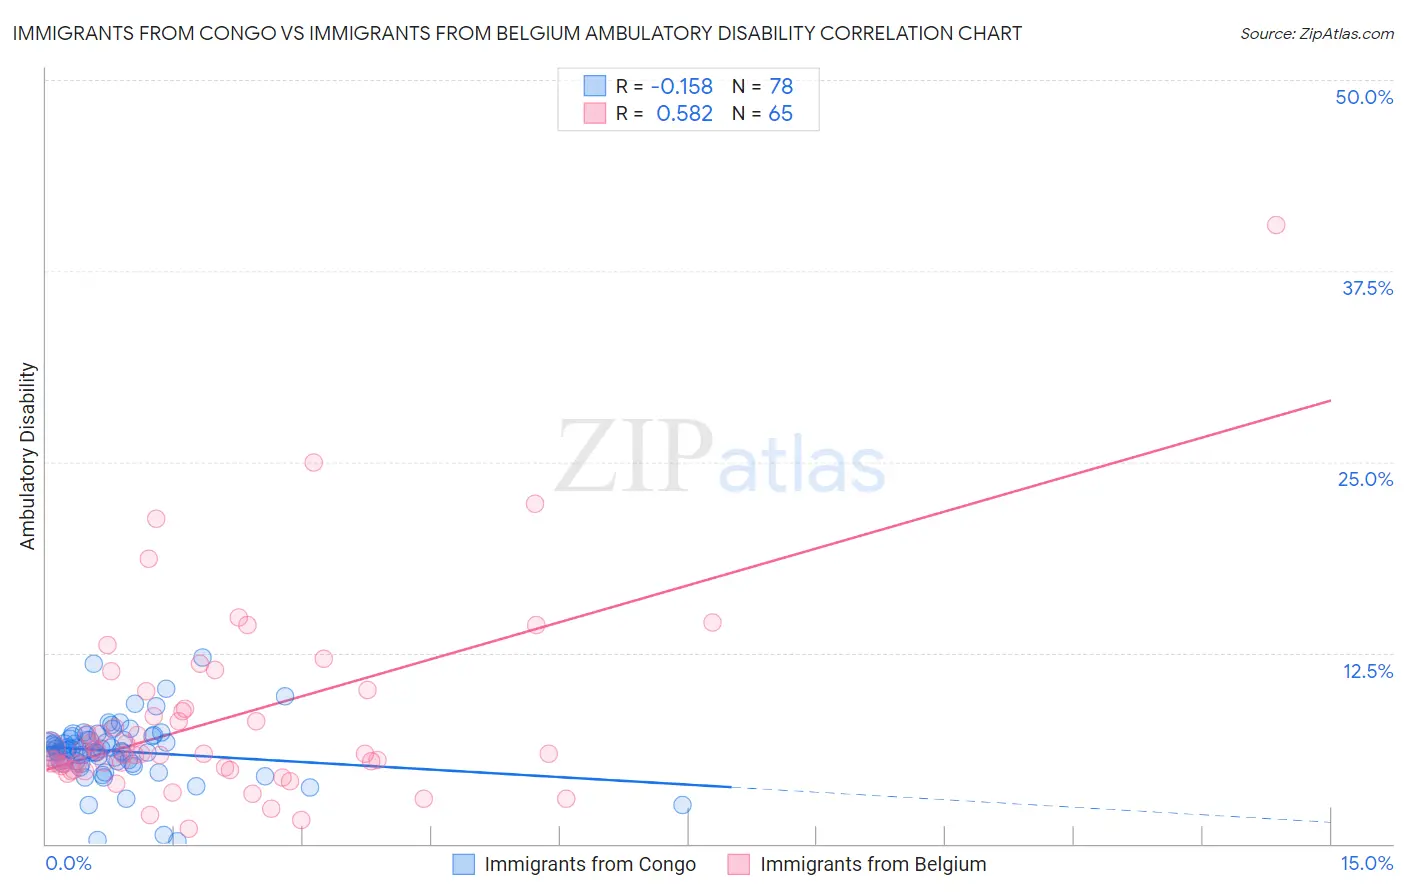 Immigrants from Congo vs Immigrants from Belgium Ambulatory Disability